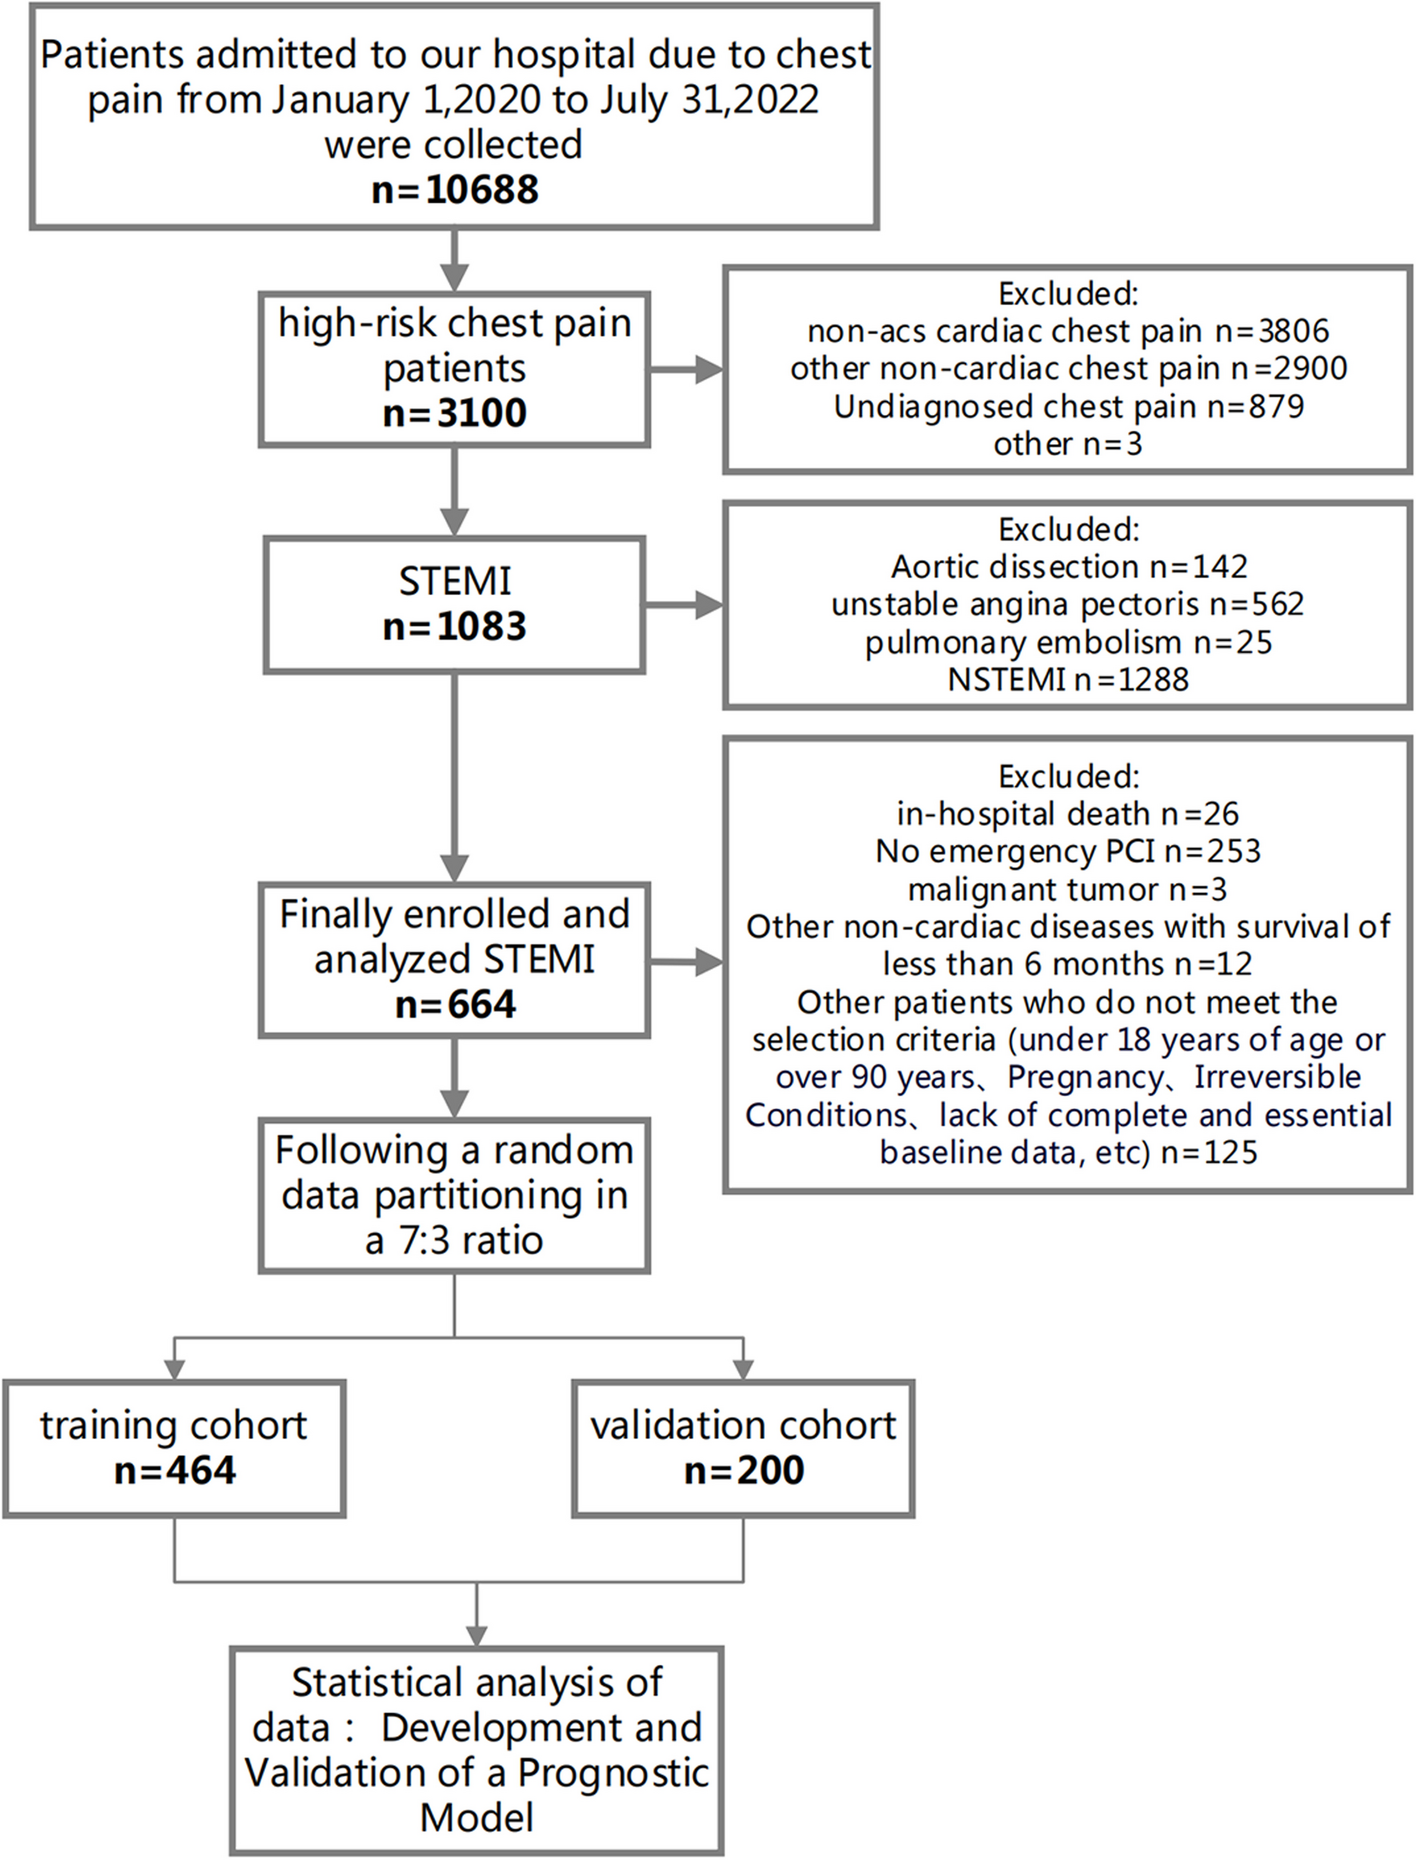 Development and validation of a prognostic model for predicting post-discharge mortality risk in patients with ST-segment elevation myocardial infarction (STEMI) undergoing primary percutaneous coronary intervention (PPCI)